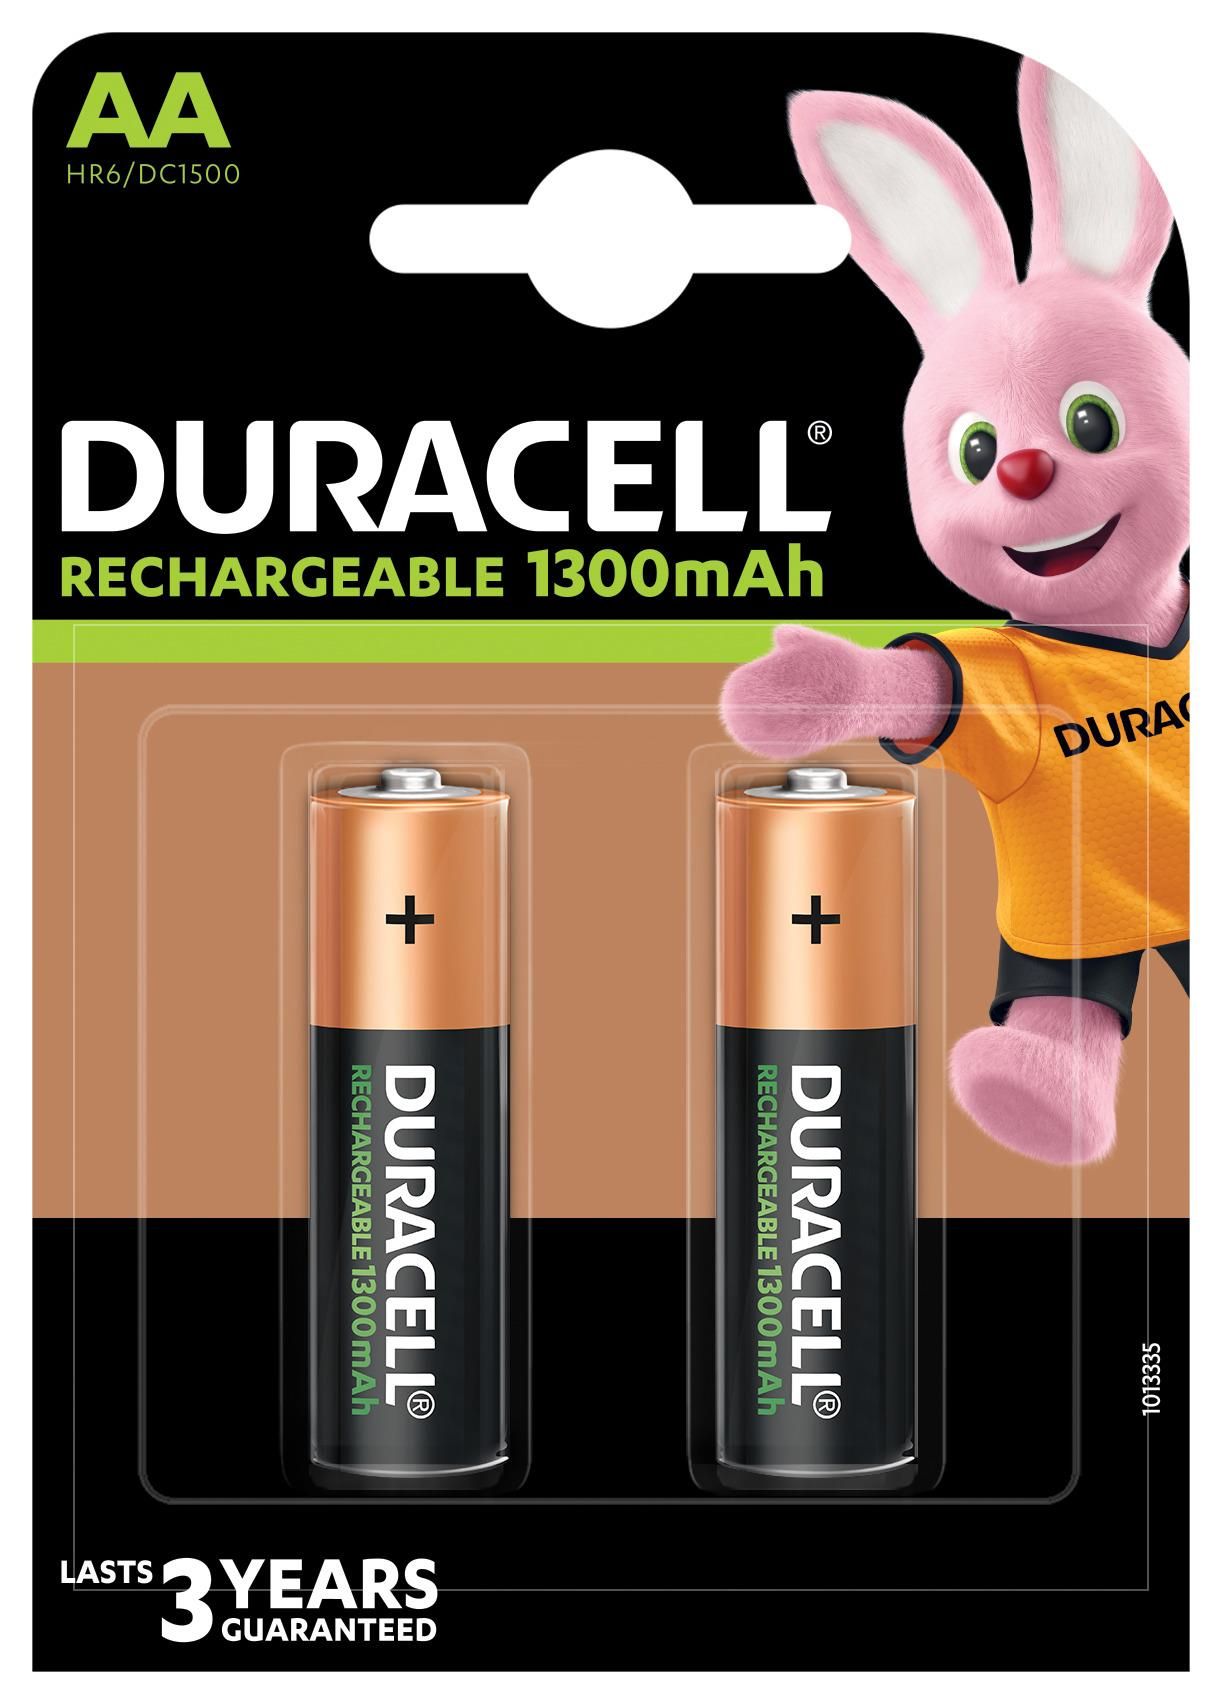 Duracell Stays Charged, AA